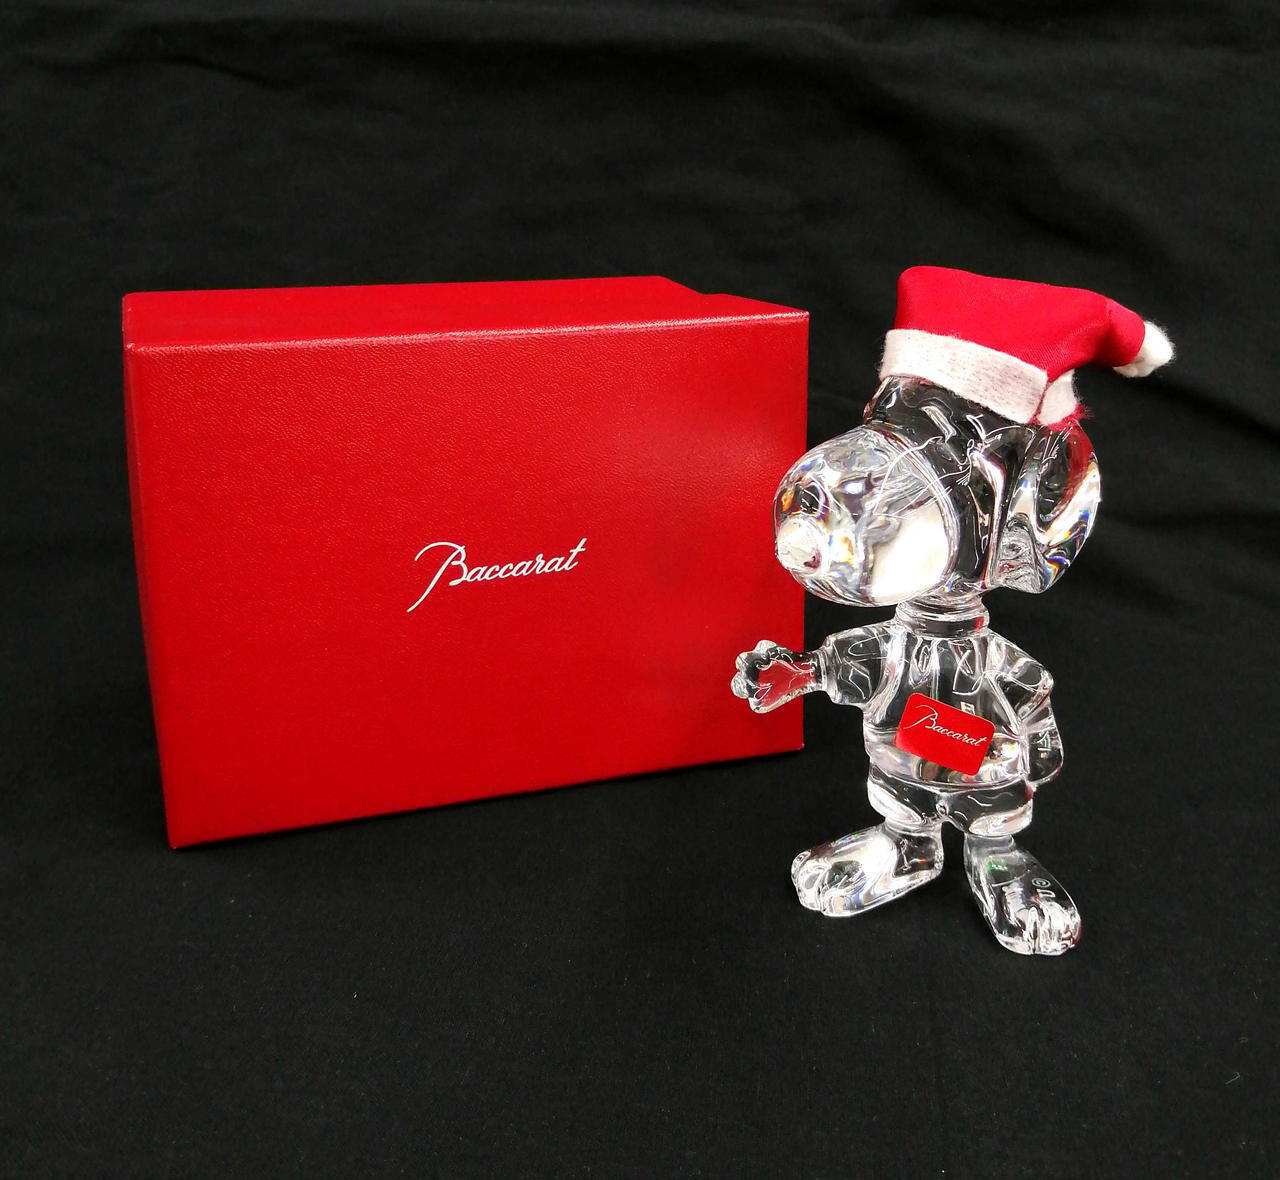 BACCARAT SNOOPY BACCARAT 0318F